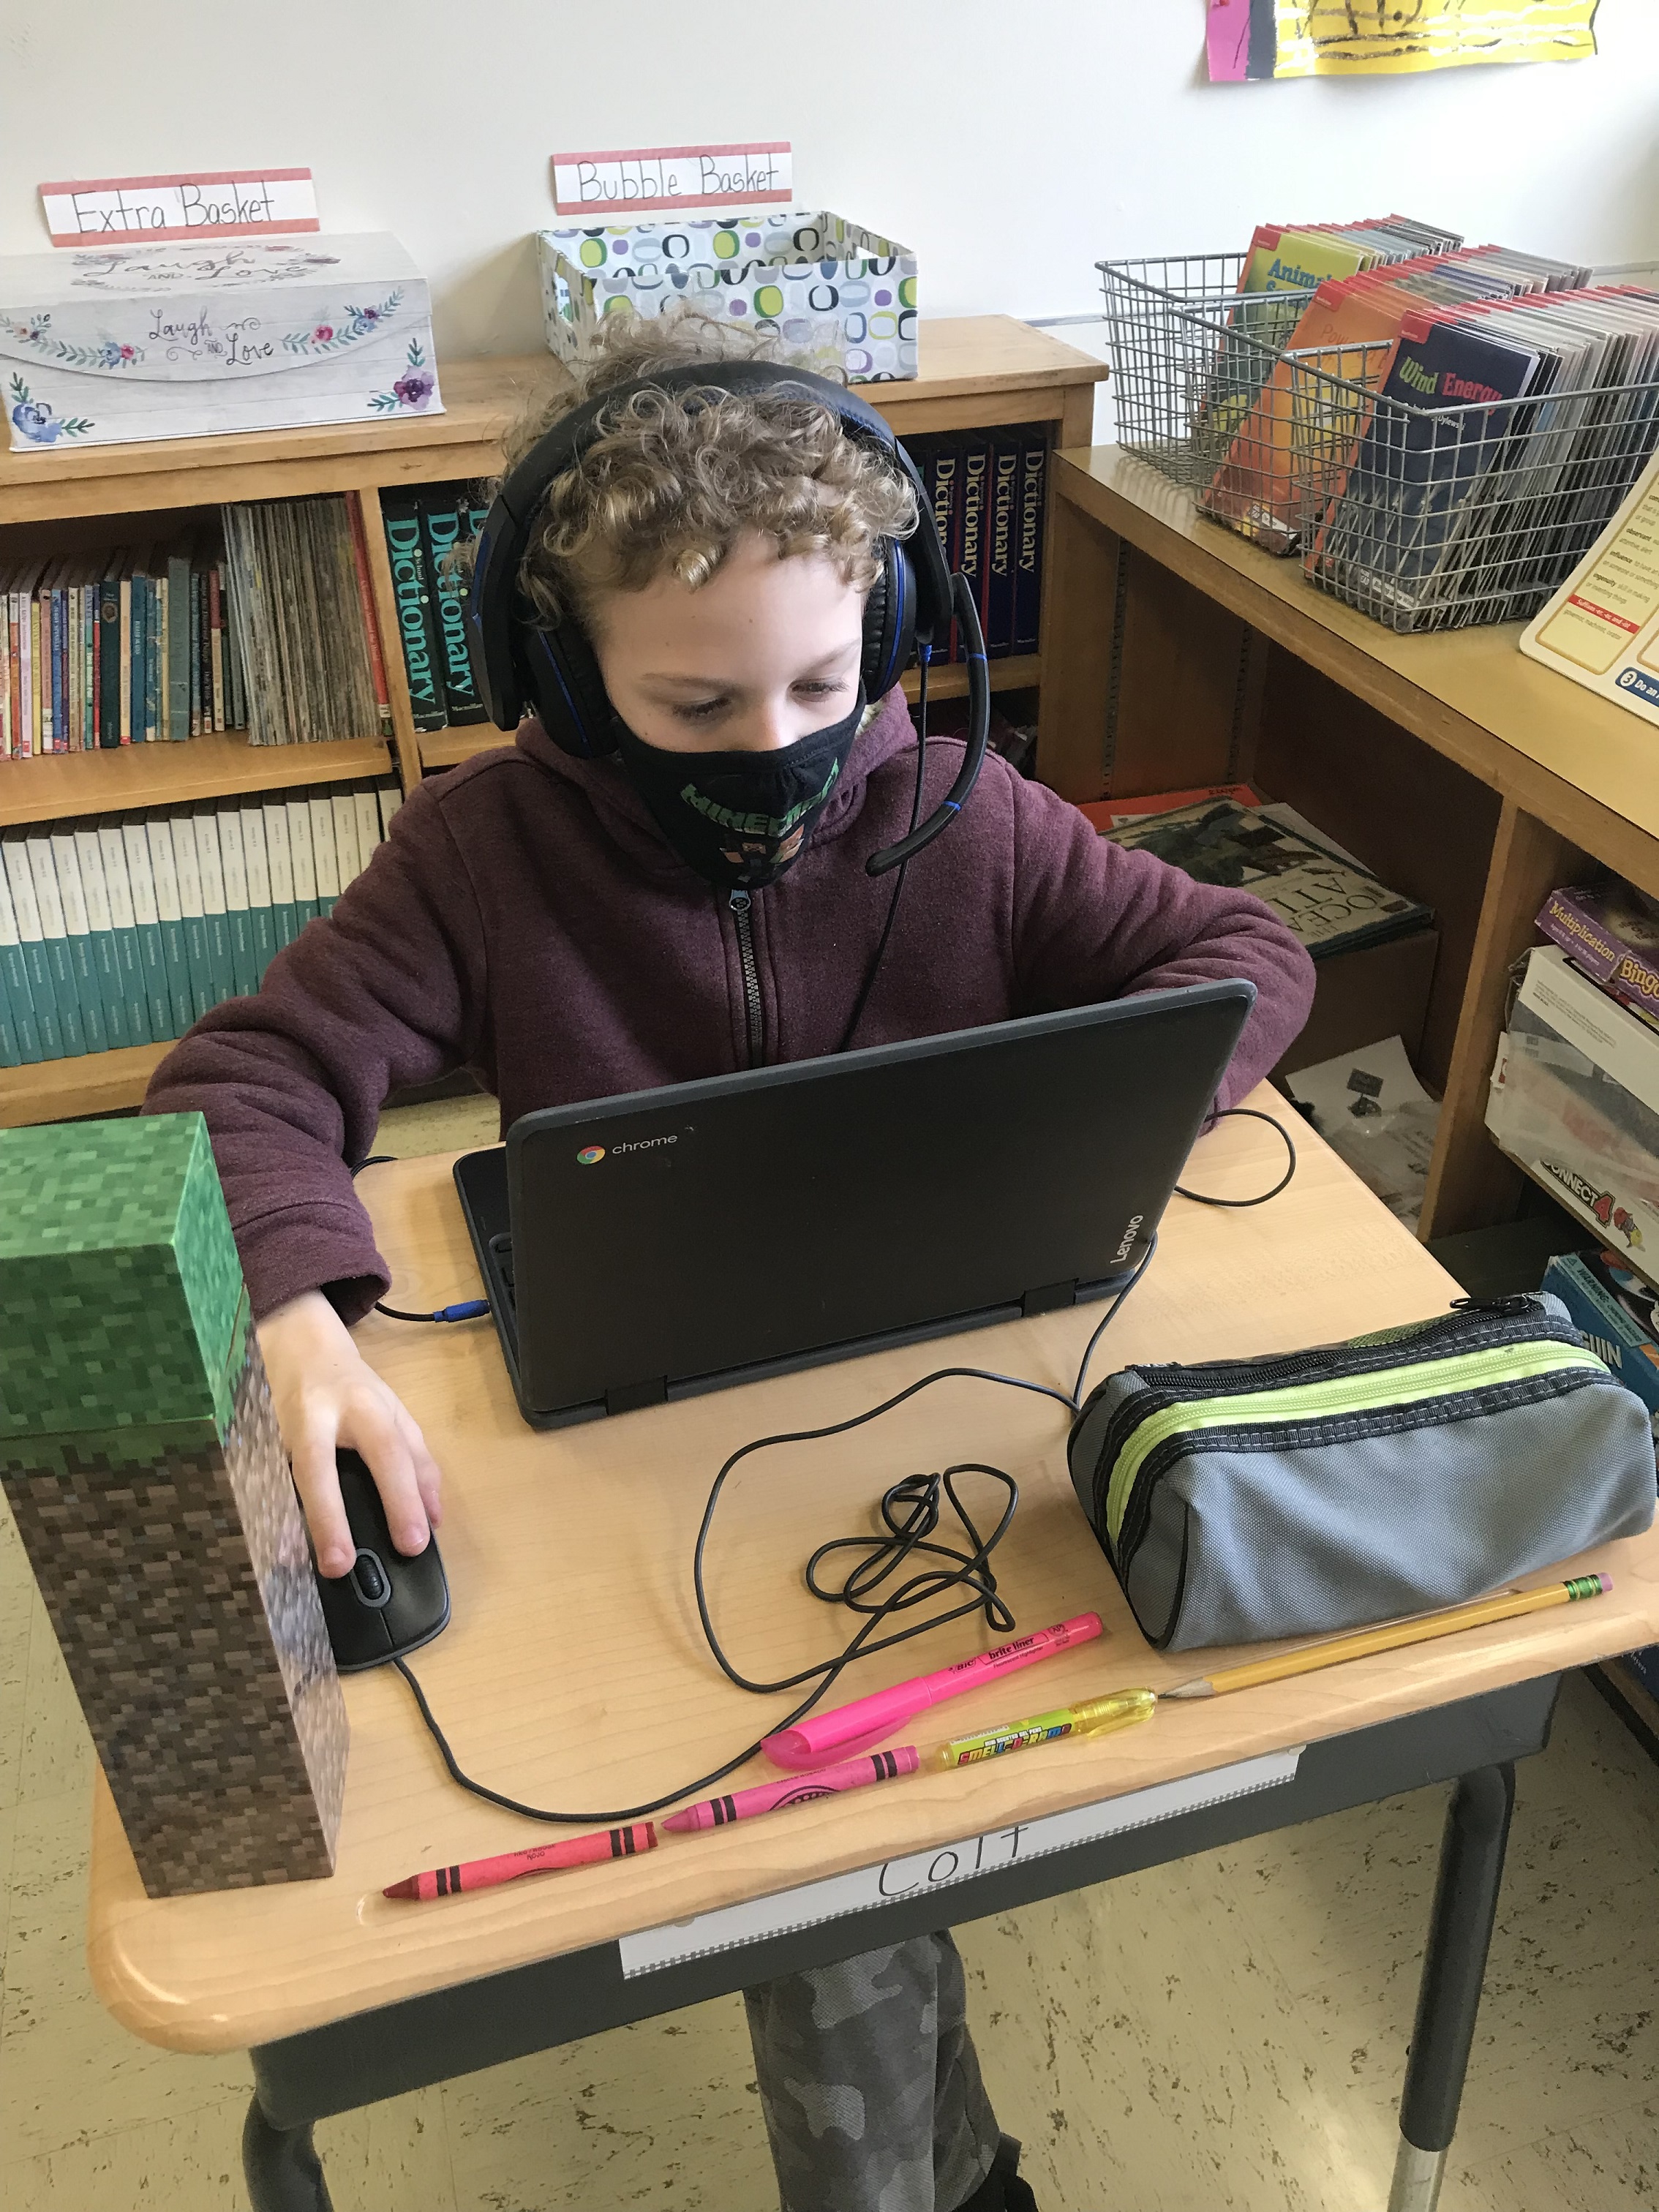 North Bay Elementary student with headphones and Chromebook